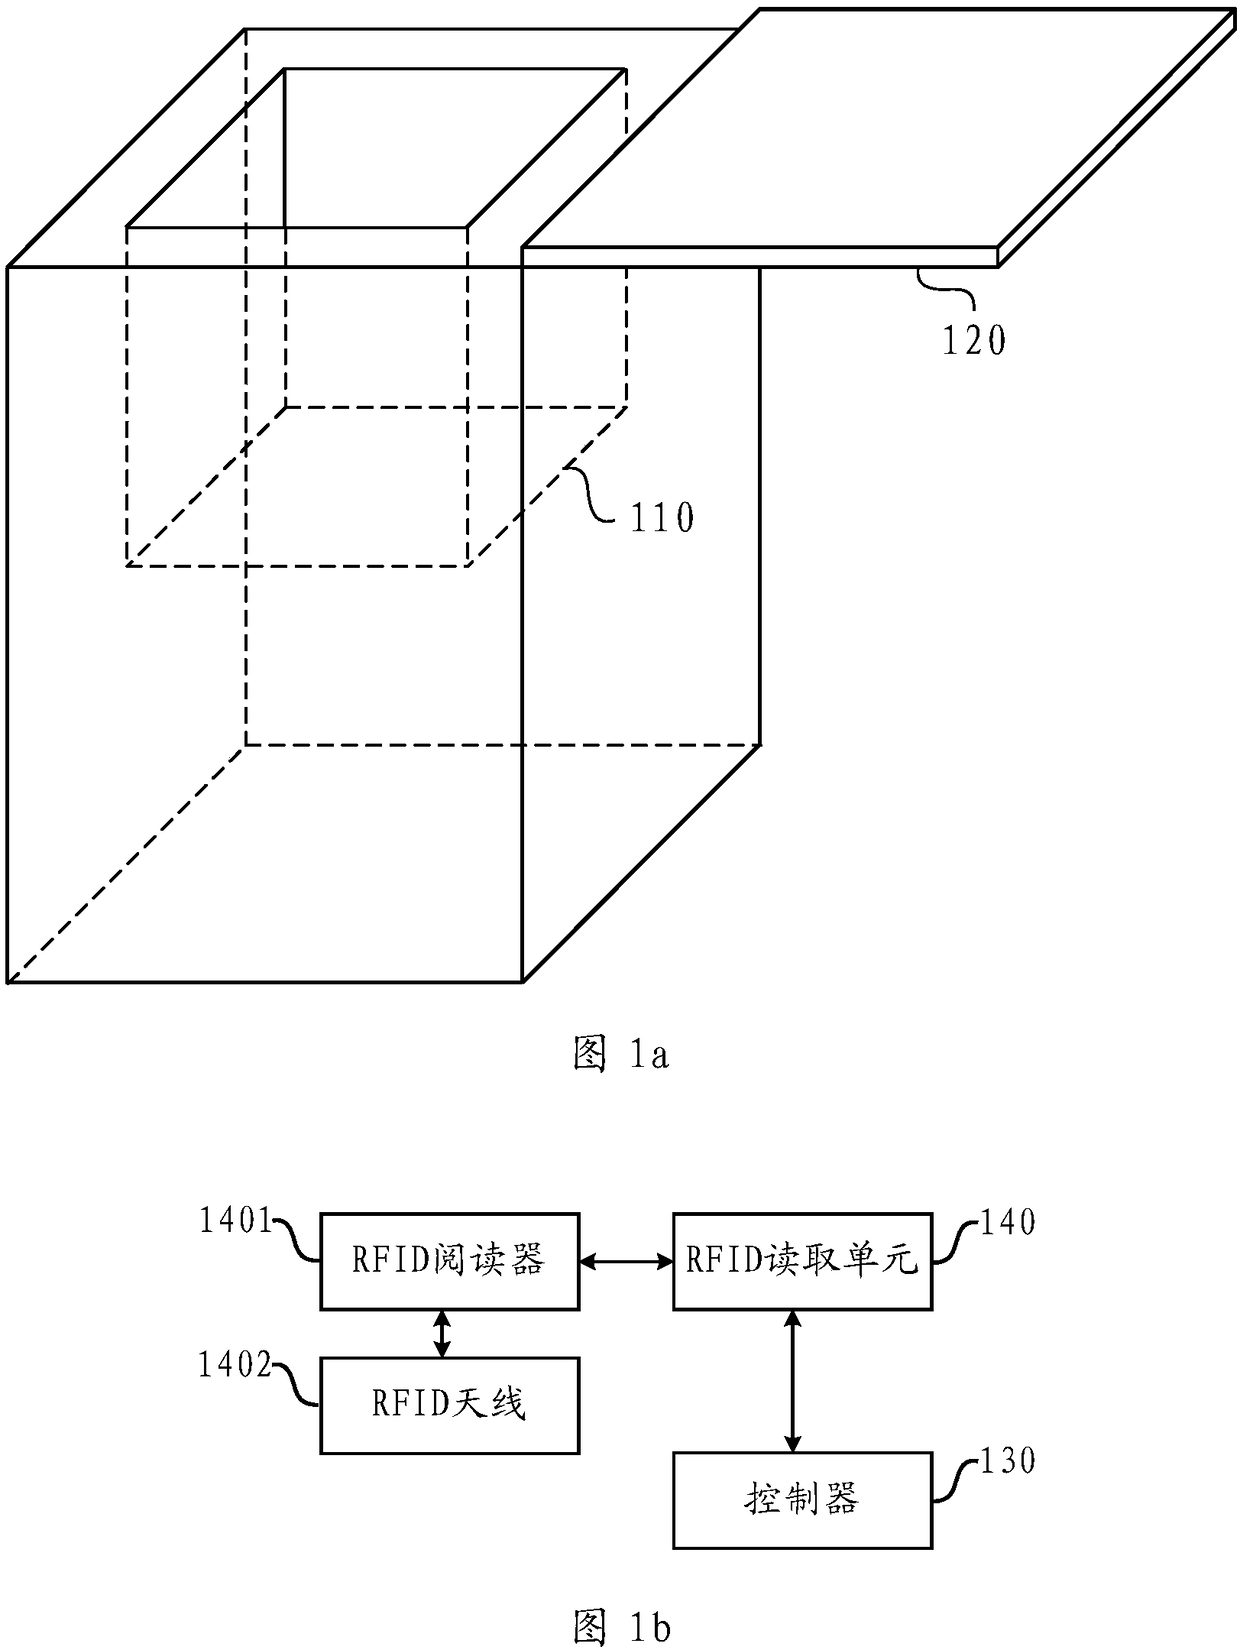 Self-service settlement device and control method thereof